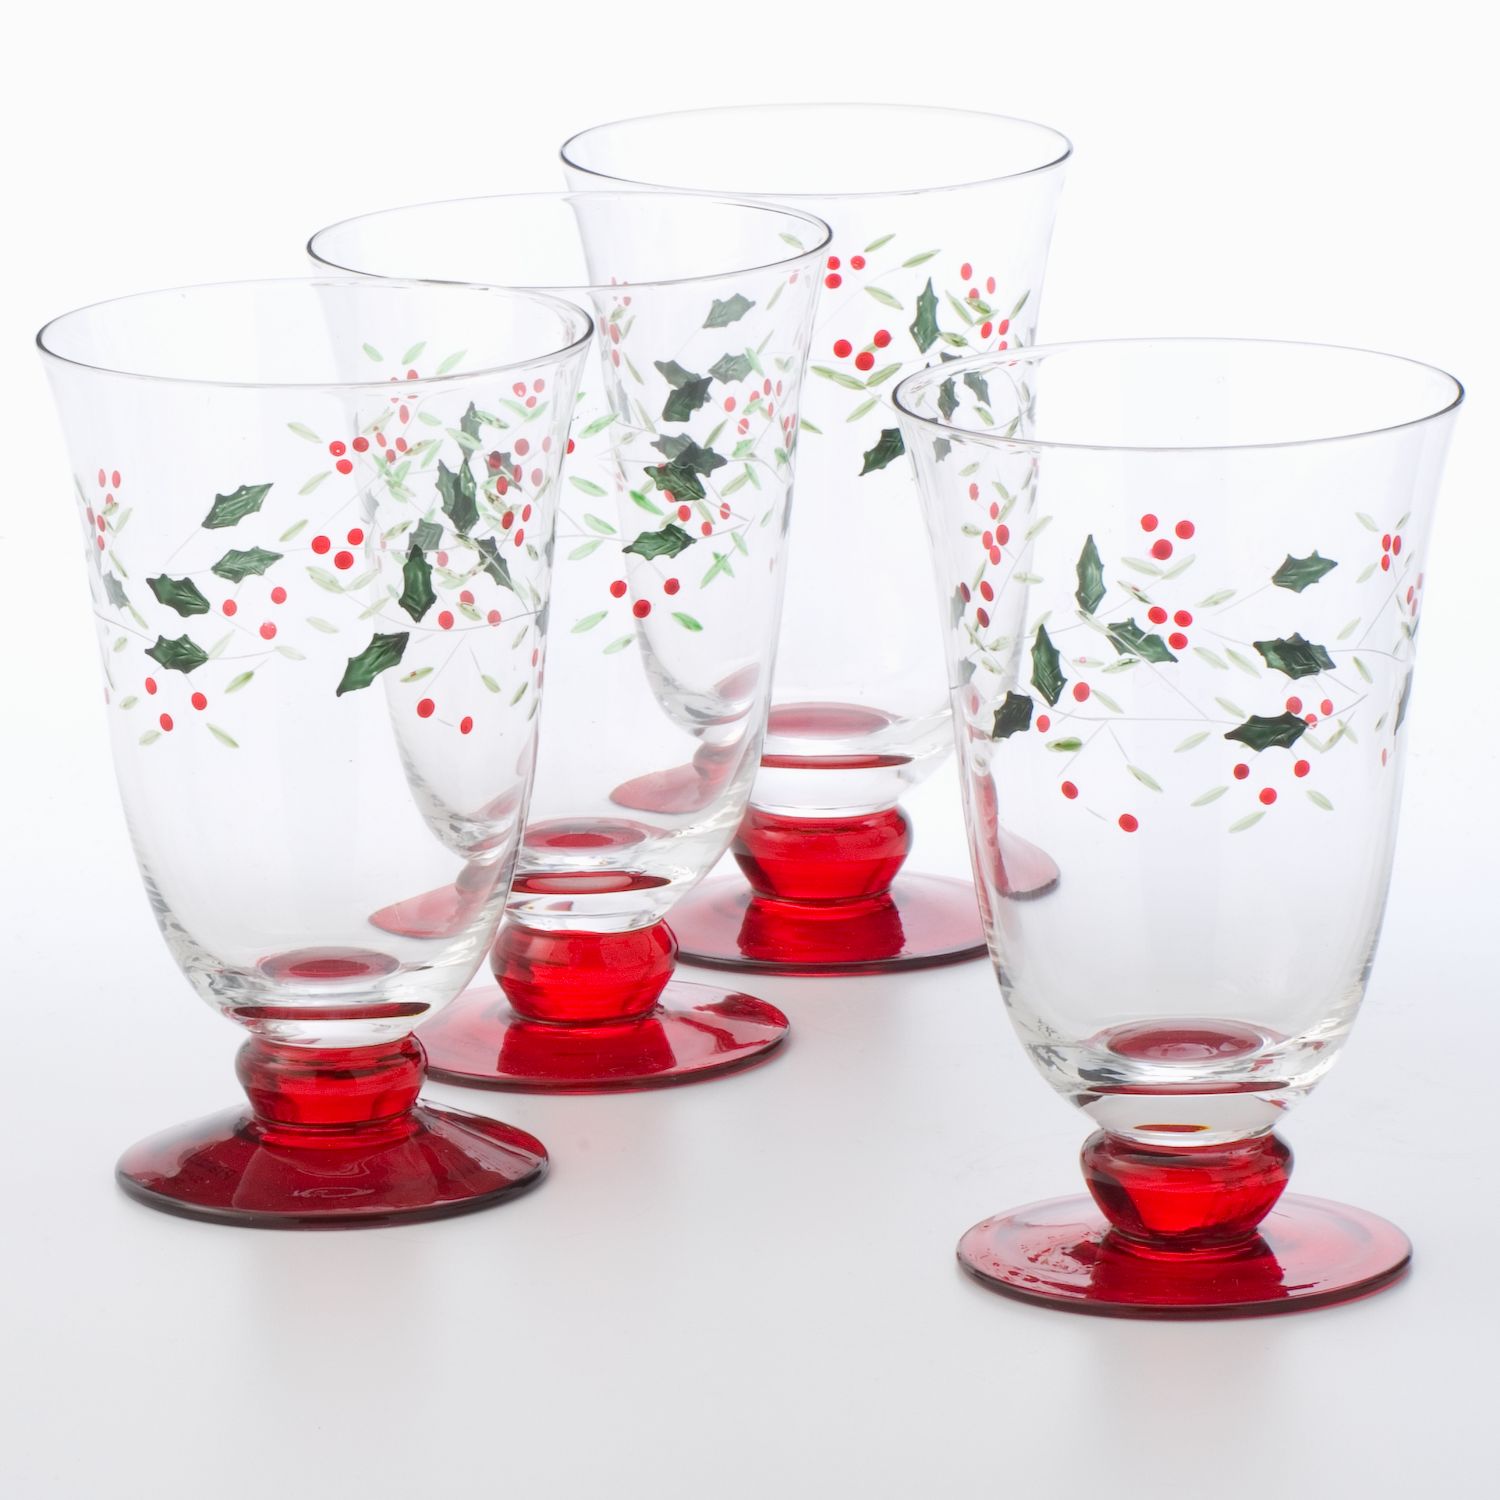 Seasonal drinkware includes wine glasses, champagne flutes, mugs, and more.